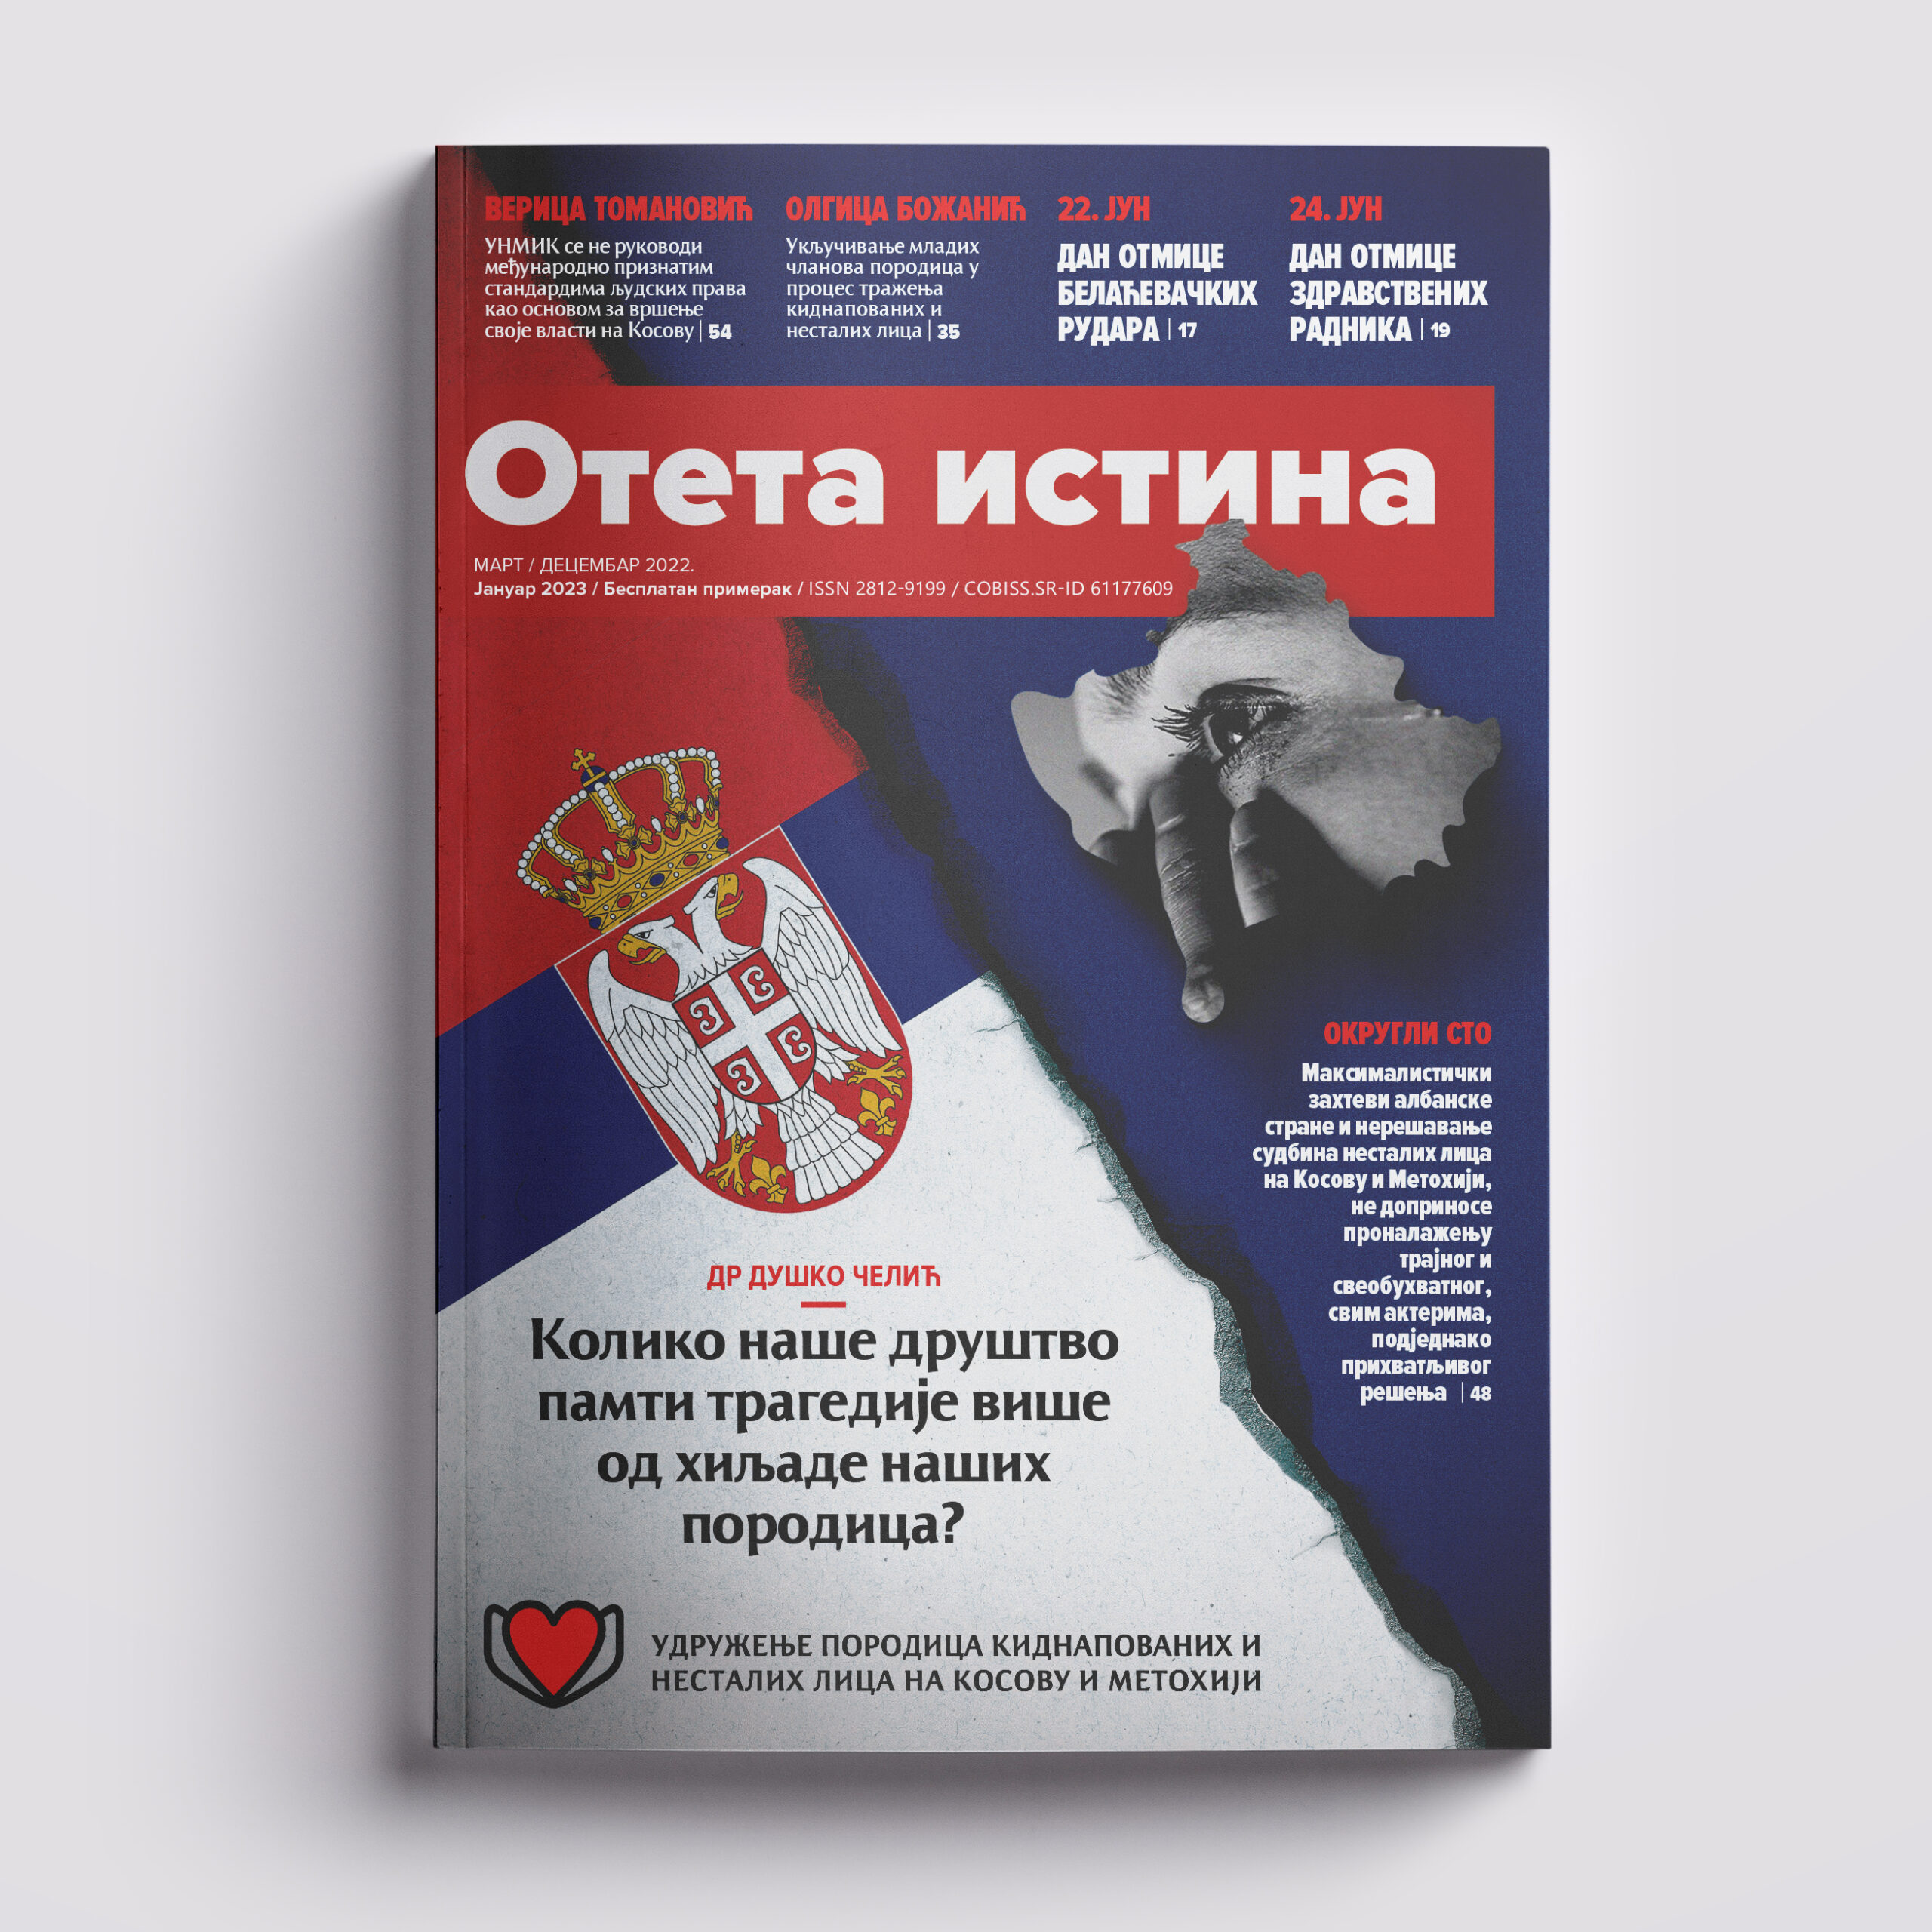 You are currently viewing “Отета истина”-март/децембар 2022.